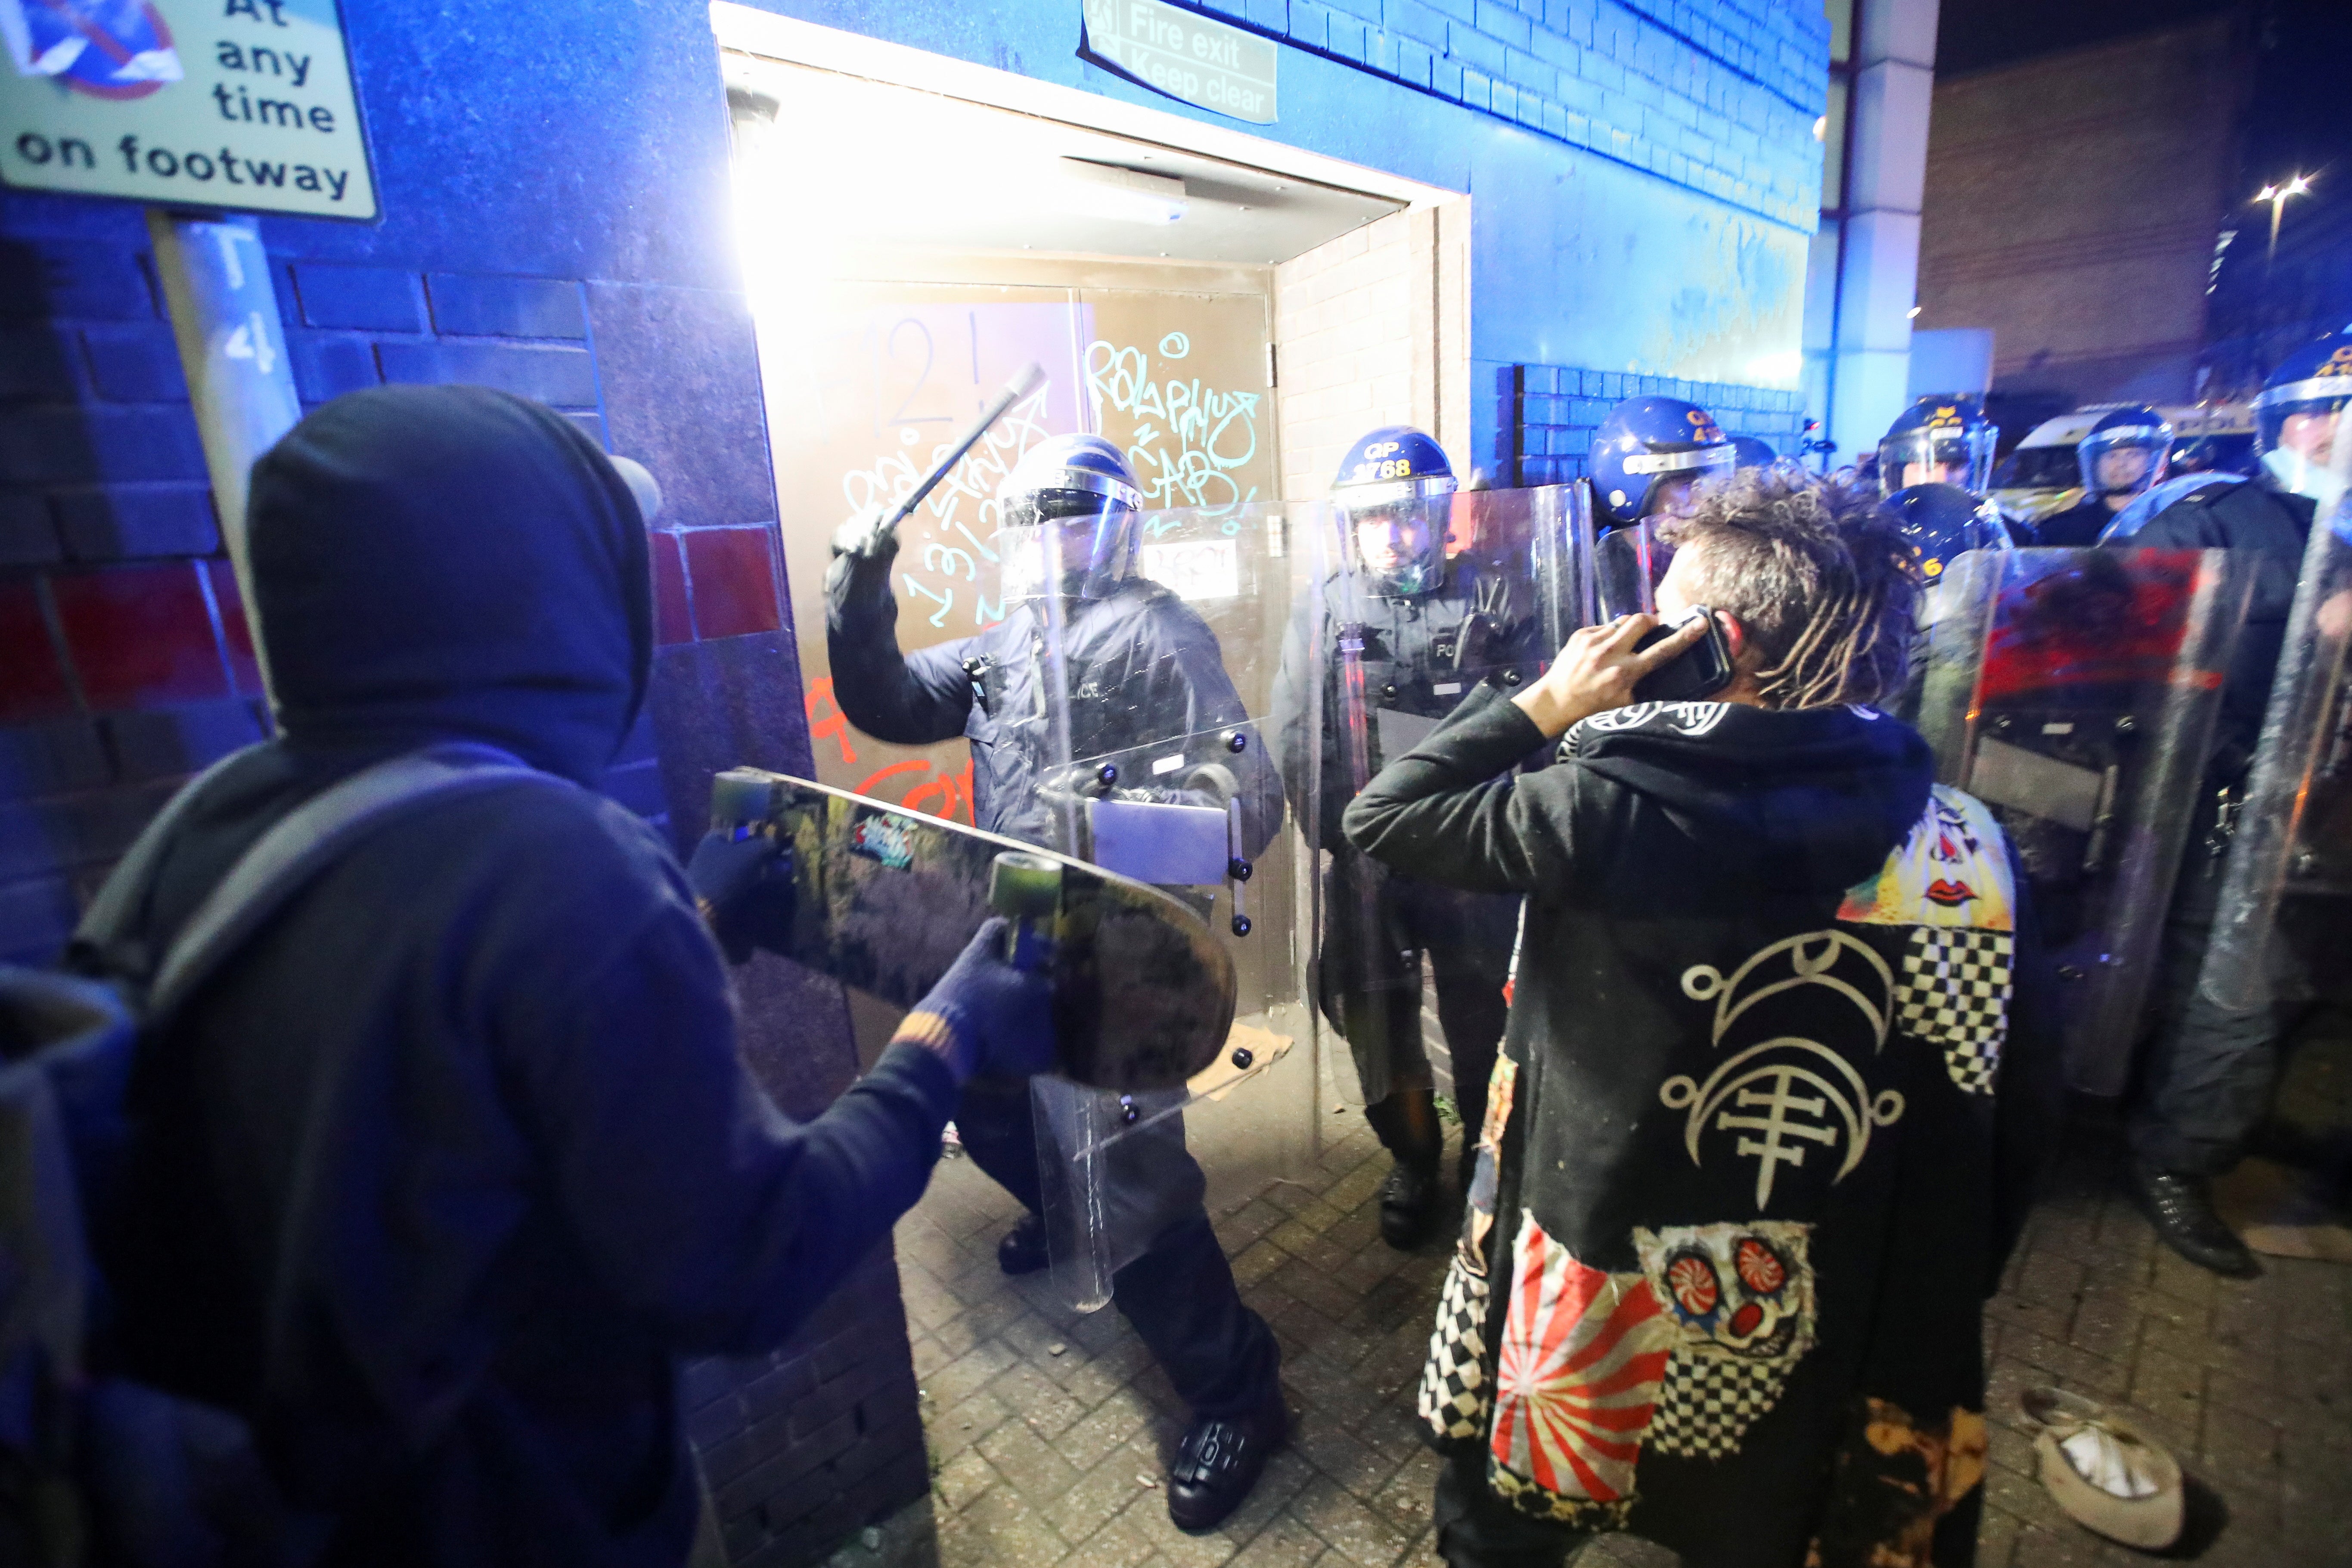 Demonstrators confront police officers during a protest against the new proposed policing bill, in Bristol on Sunday evening